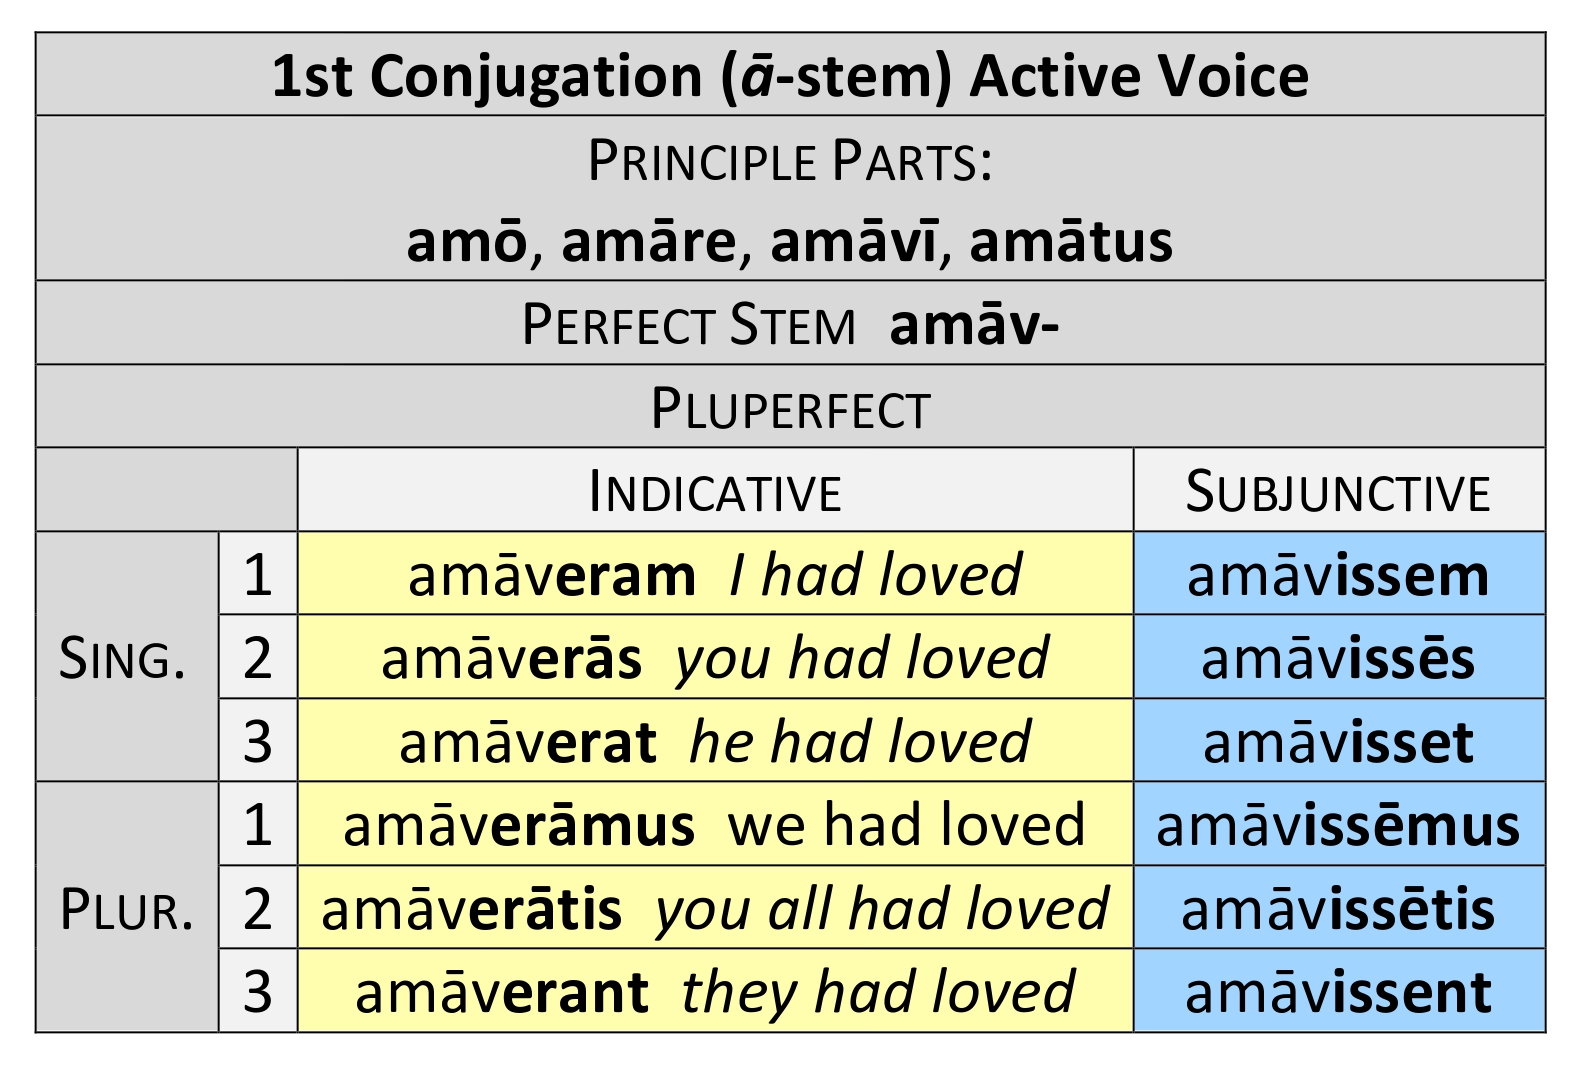 Pluperfect active conjugation of amō